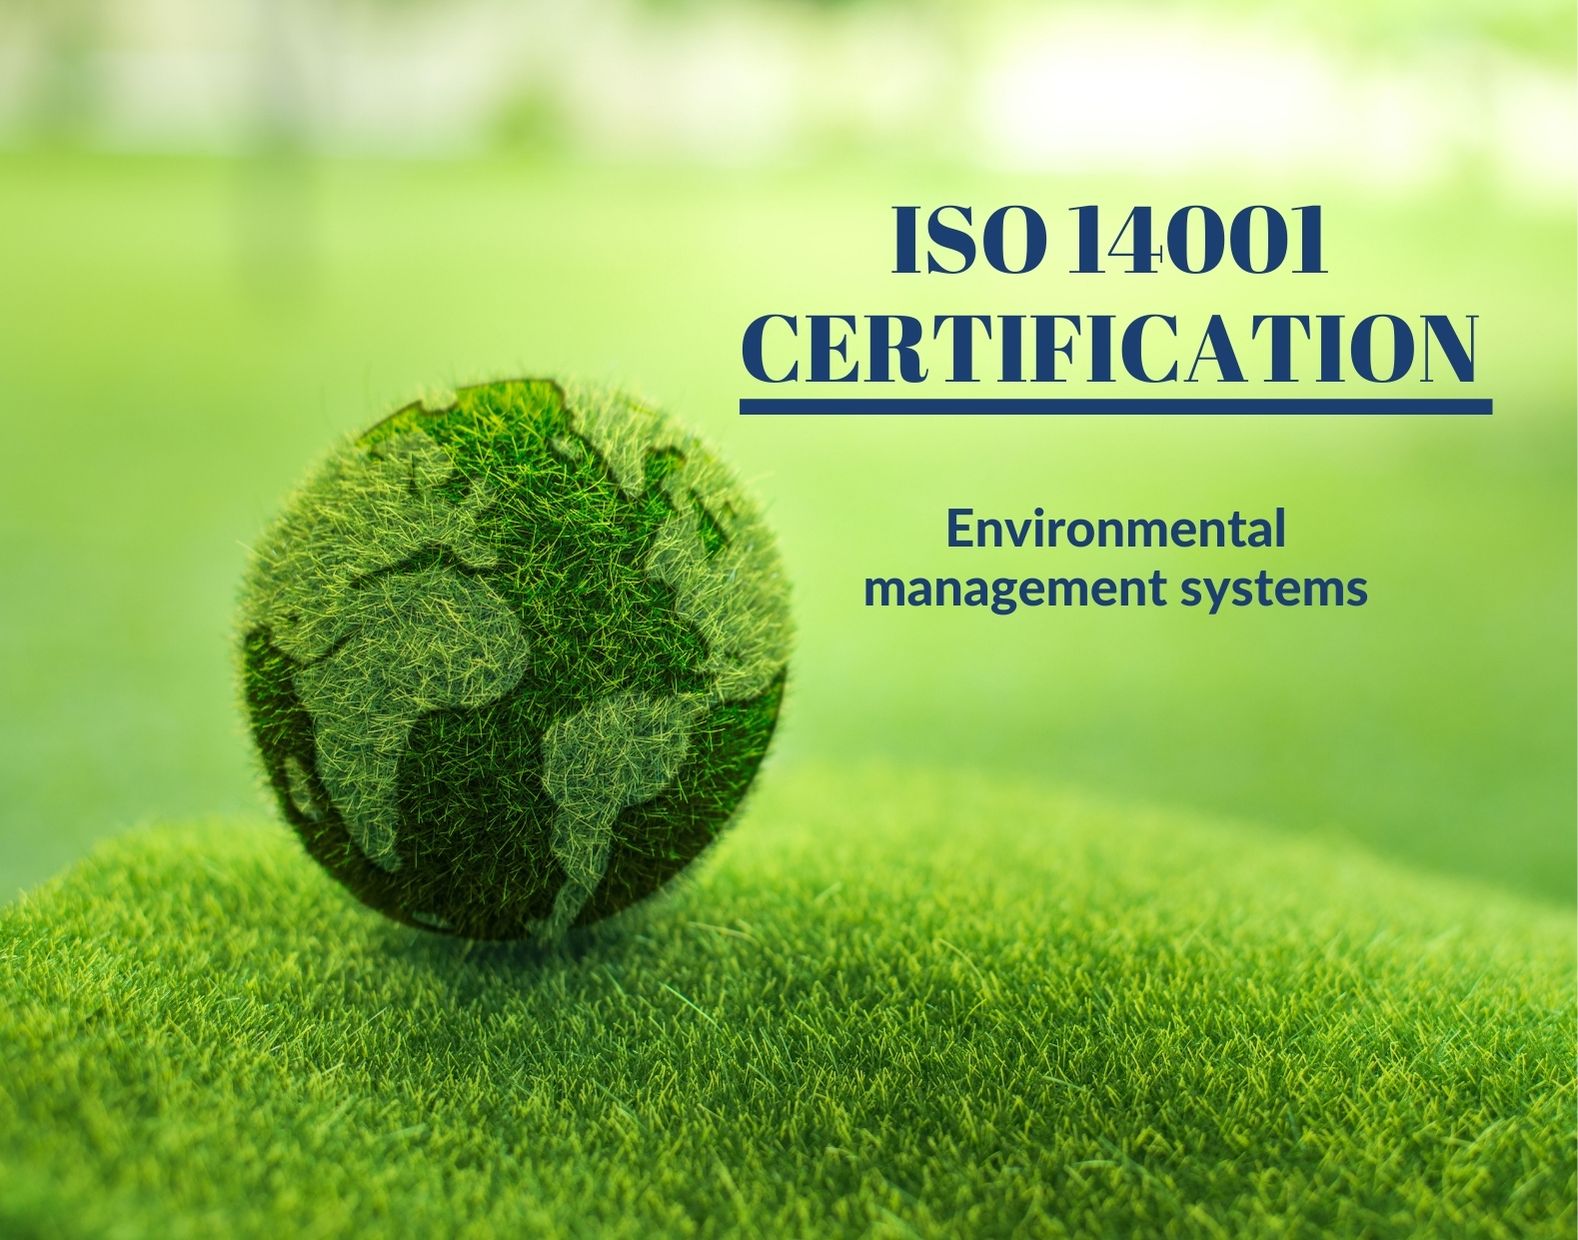 ISO 14001 Certification in India